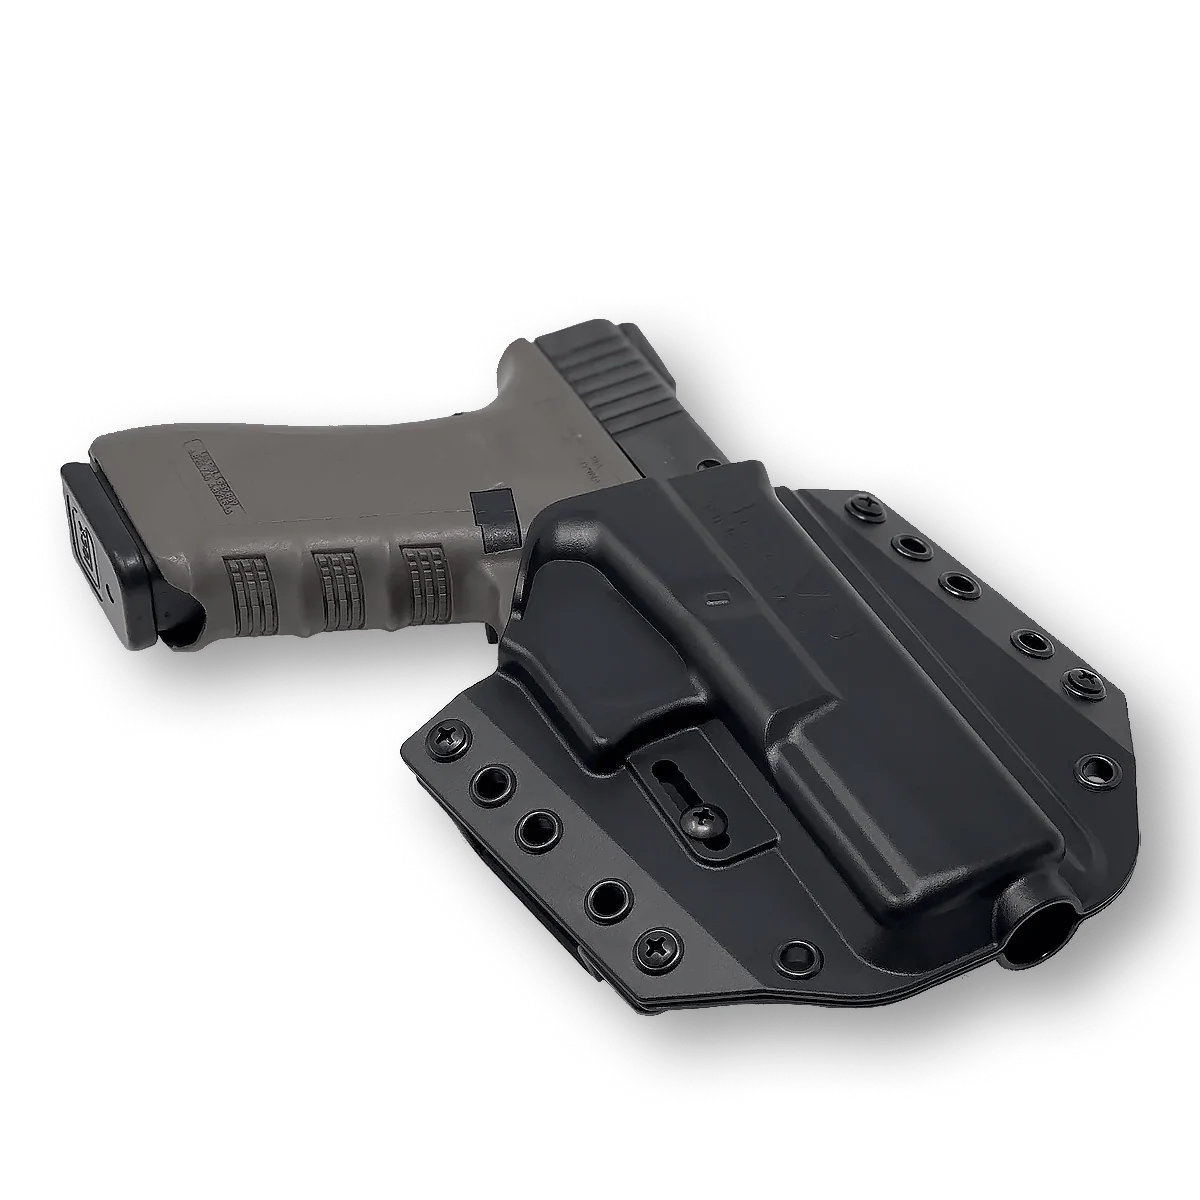 Bravo OWB (Outside Waistband) Right Handed Glock 19,23,32,19X,19MOS,45 (BC10-1001)